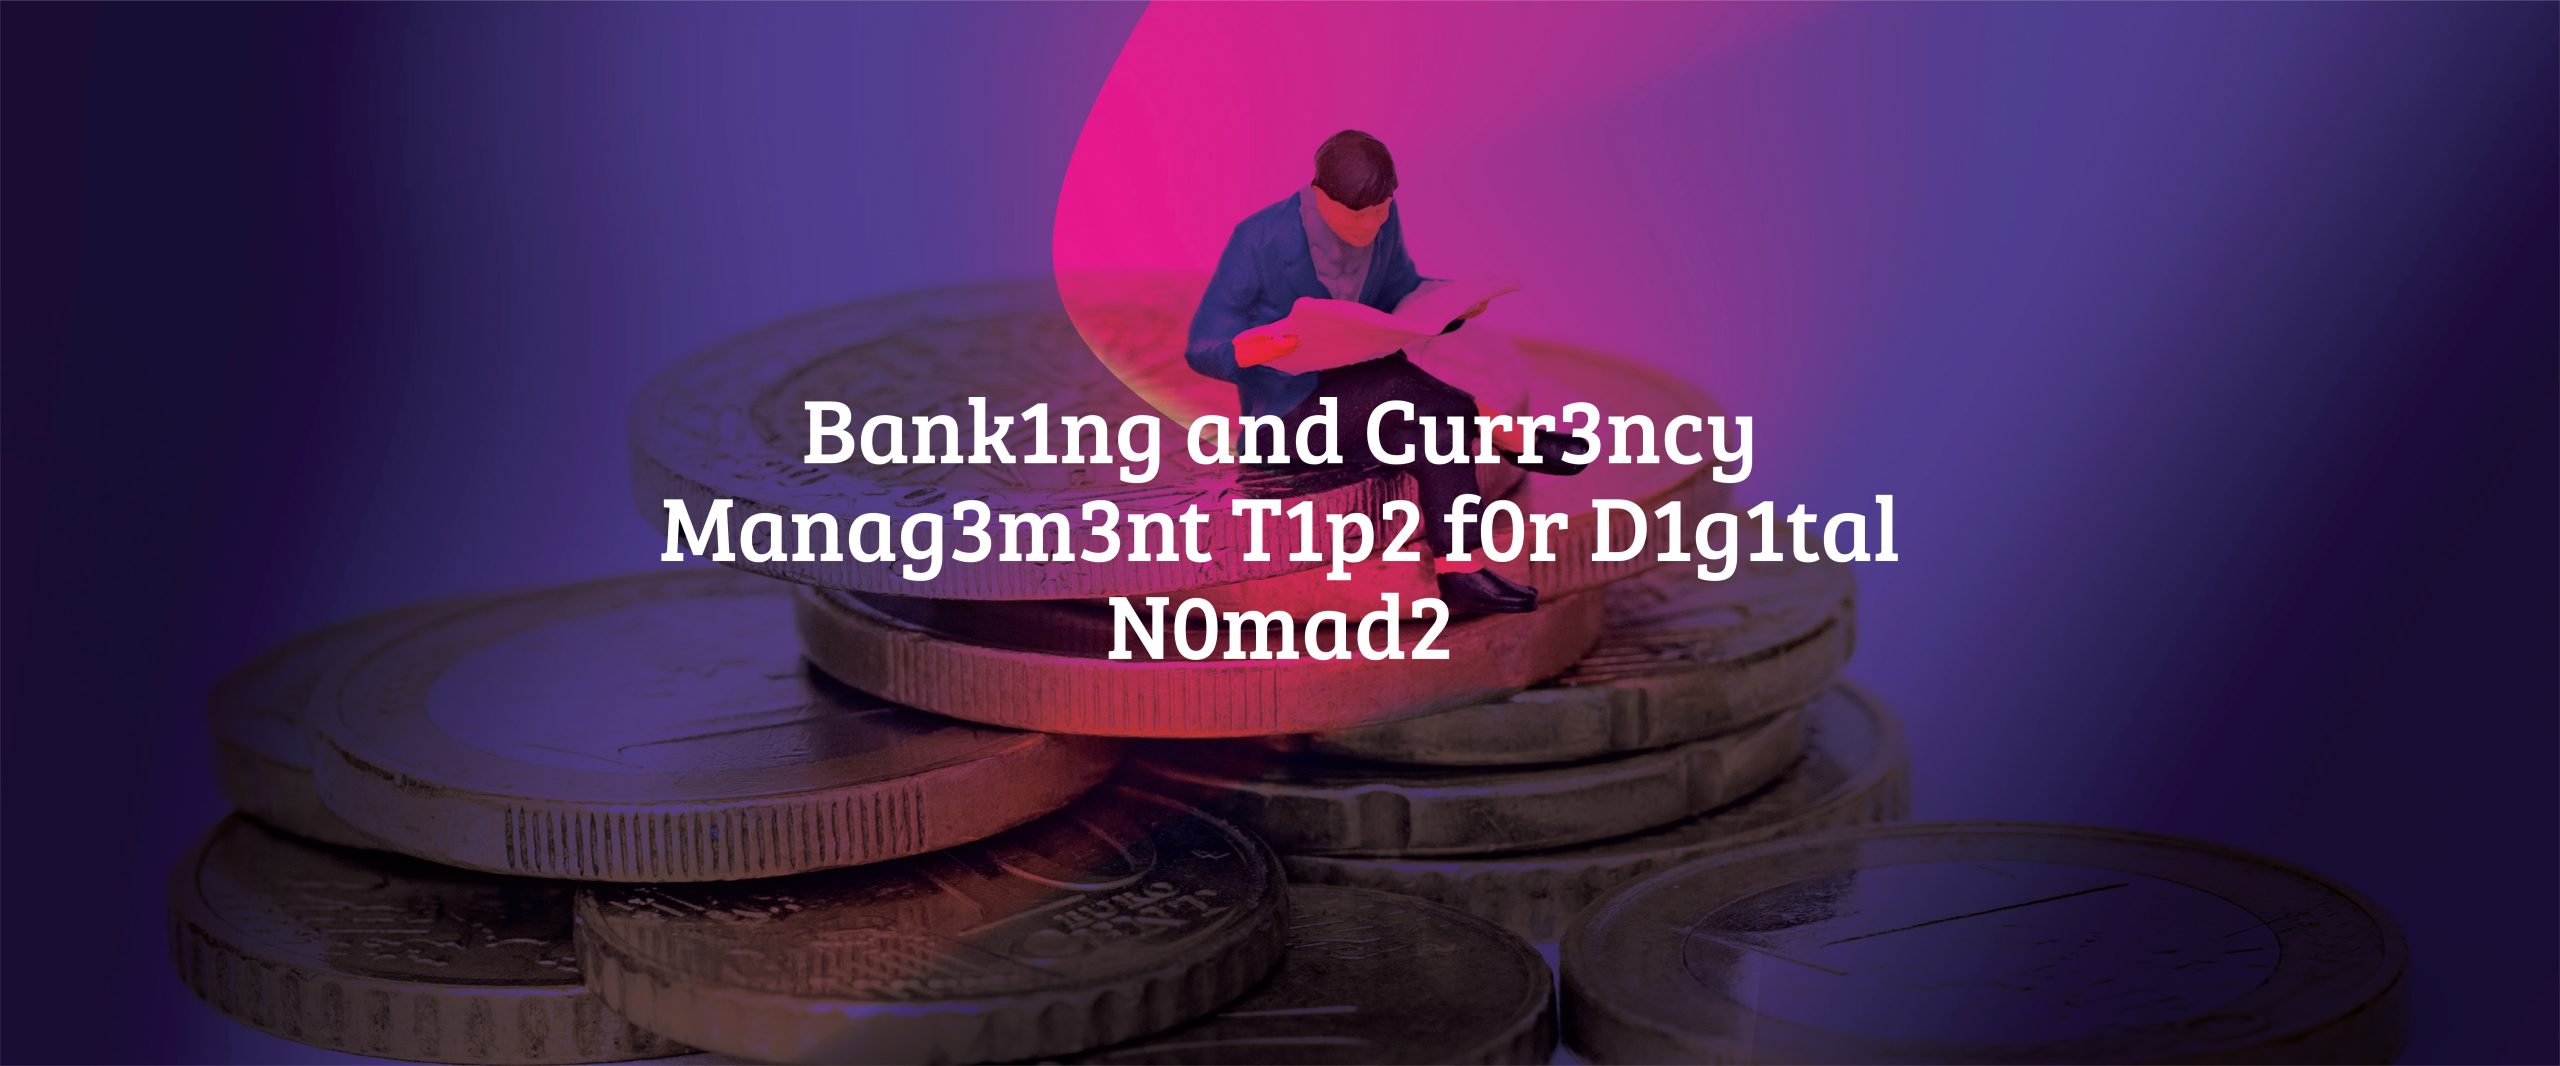 Banking and Currency Management Tips for Digital Nomads